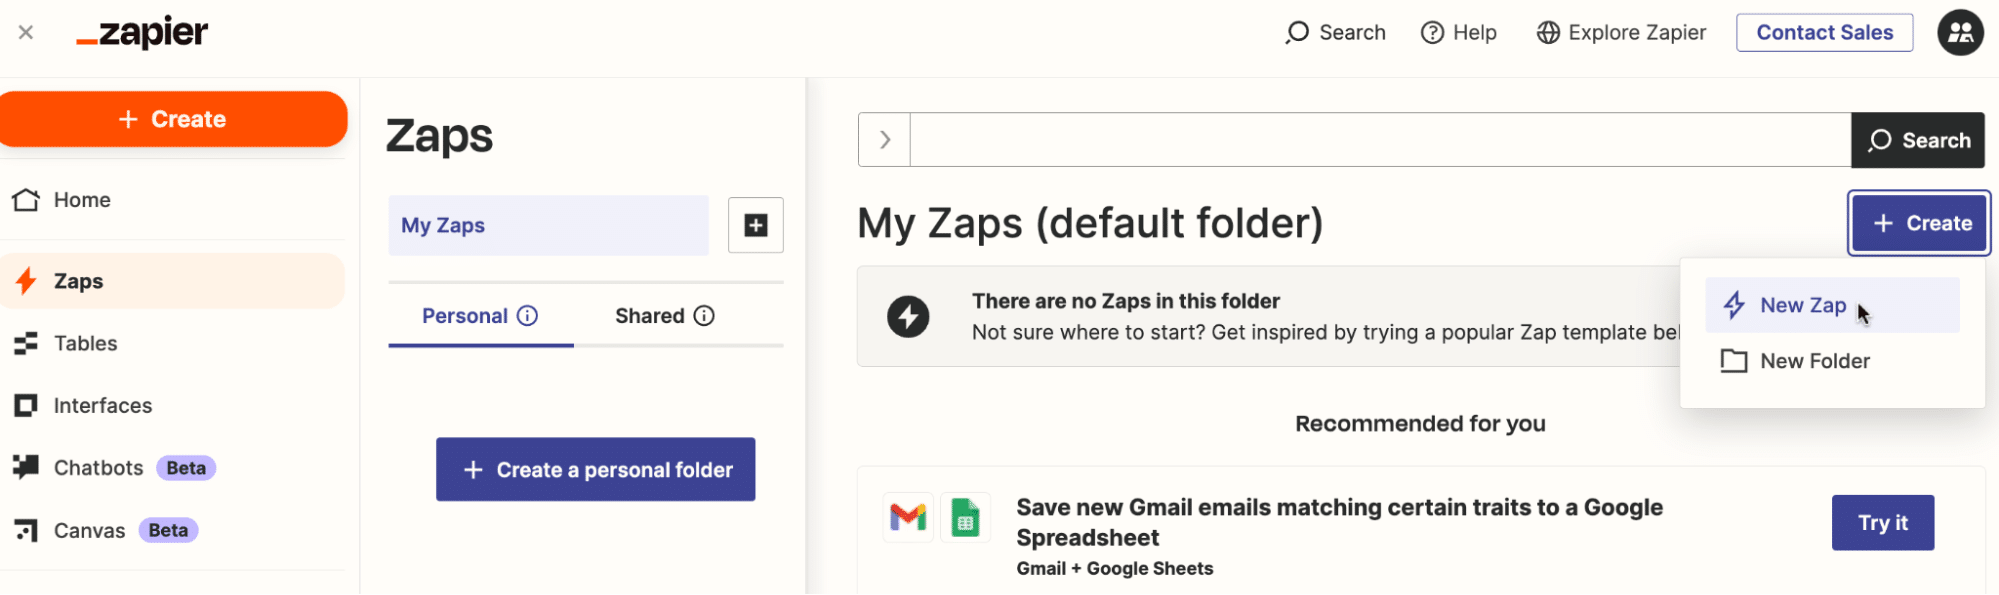 Creating a new Zap workflow in a Zapier account.